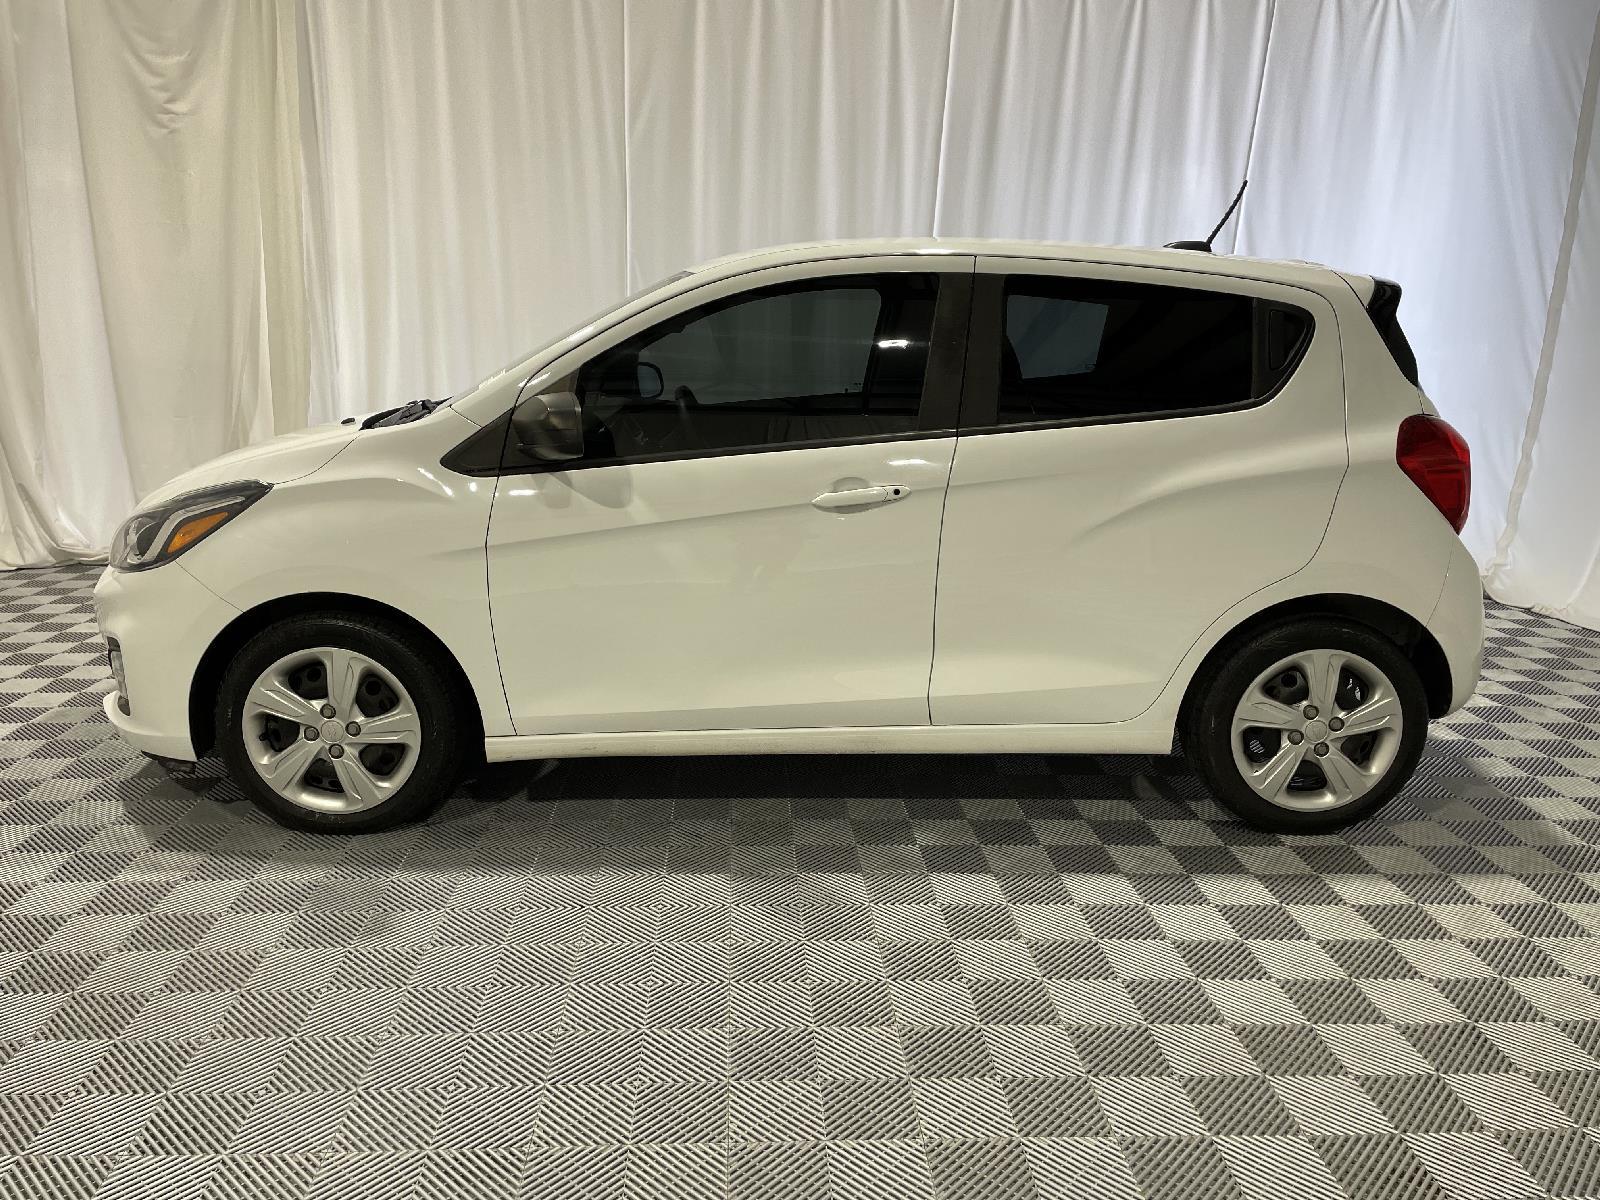 Used 2019 Chevrolet Spark LS with VIN KL8CB6SA7KC730207 for sale in Saint Joseph, MO